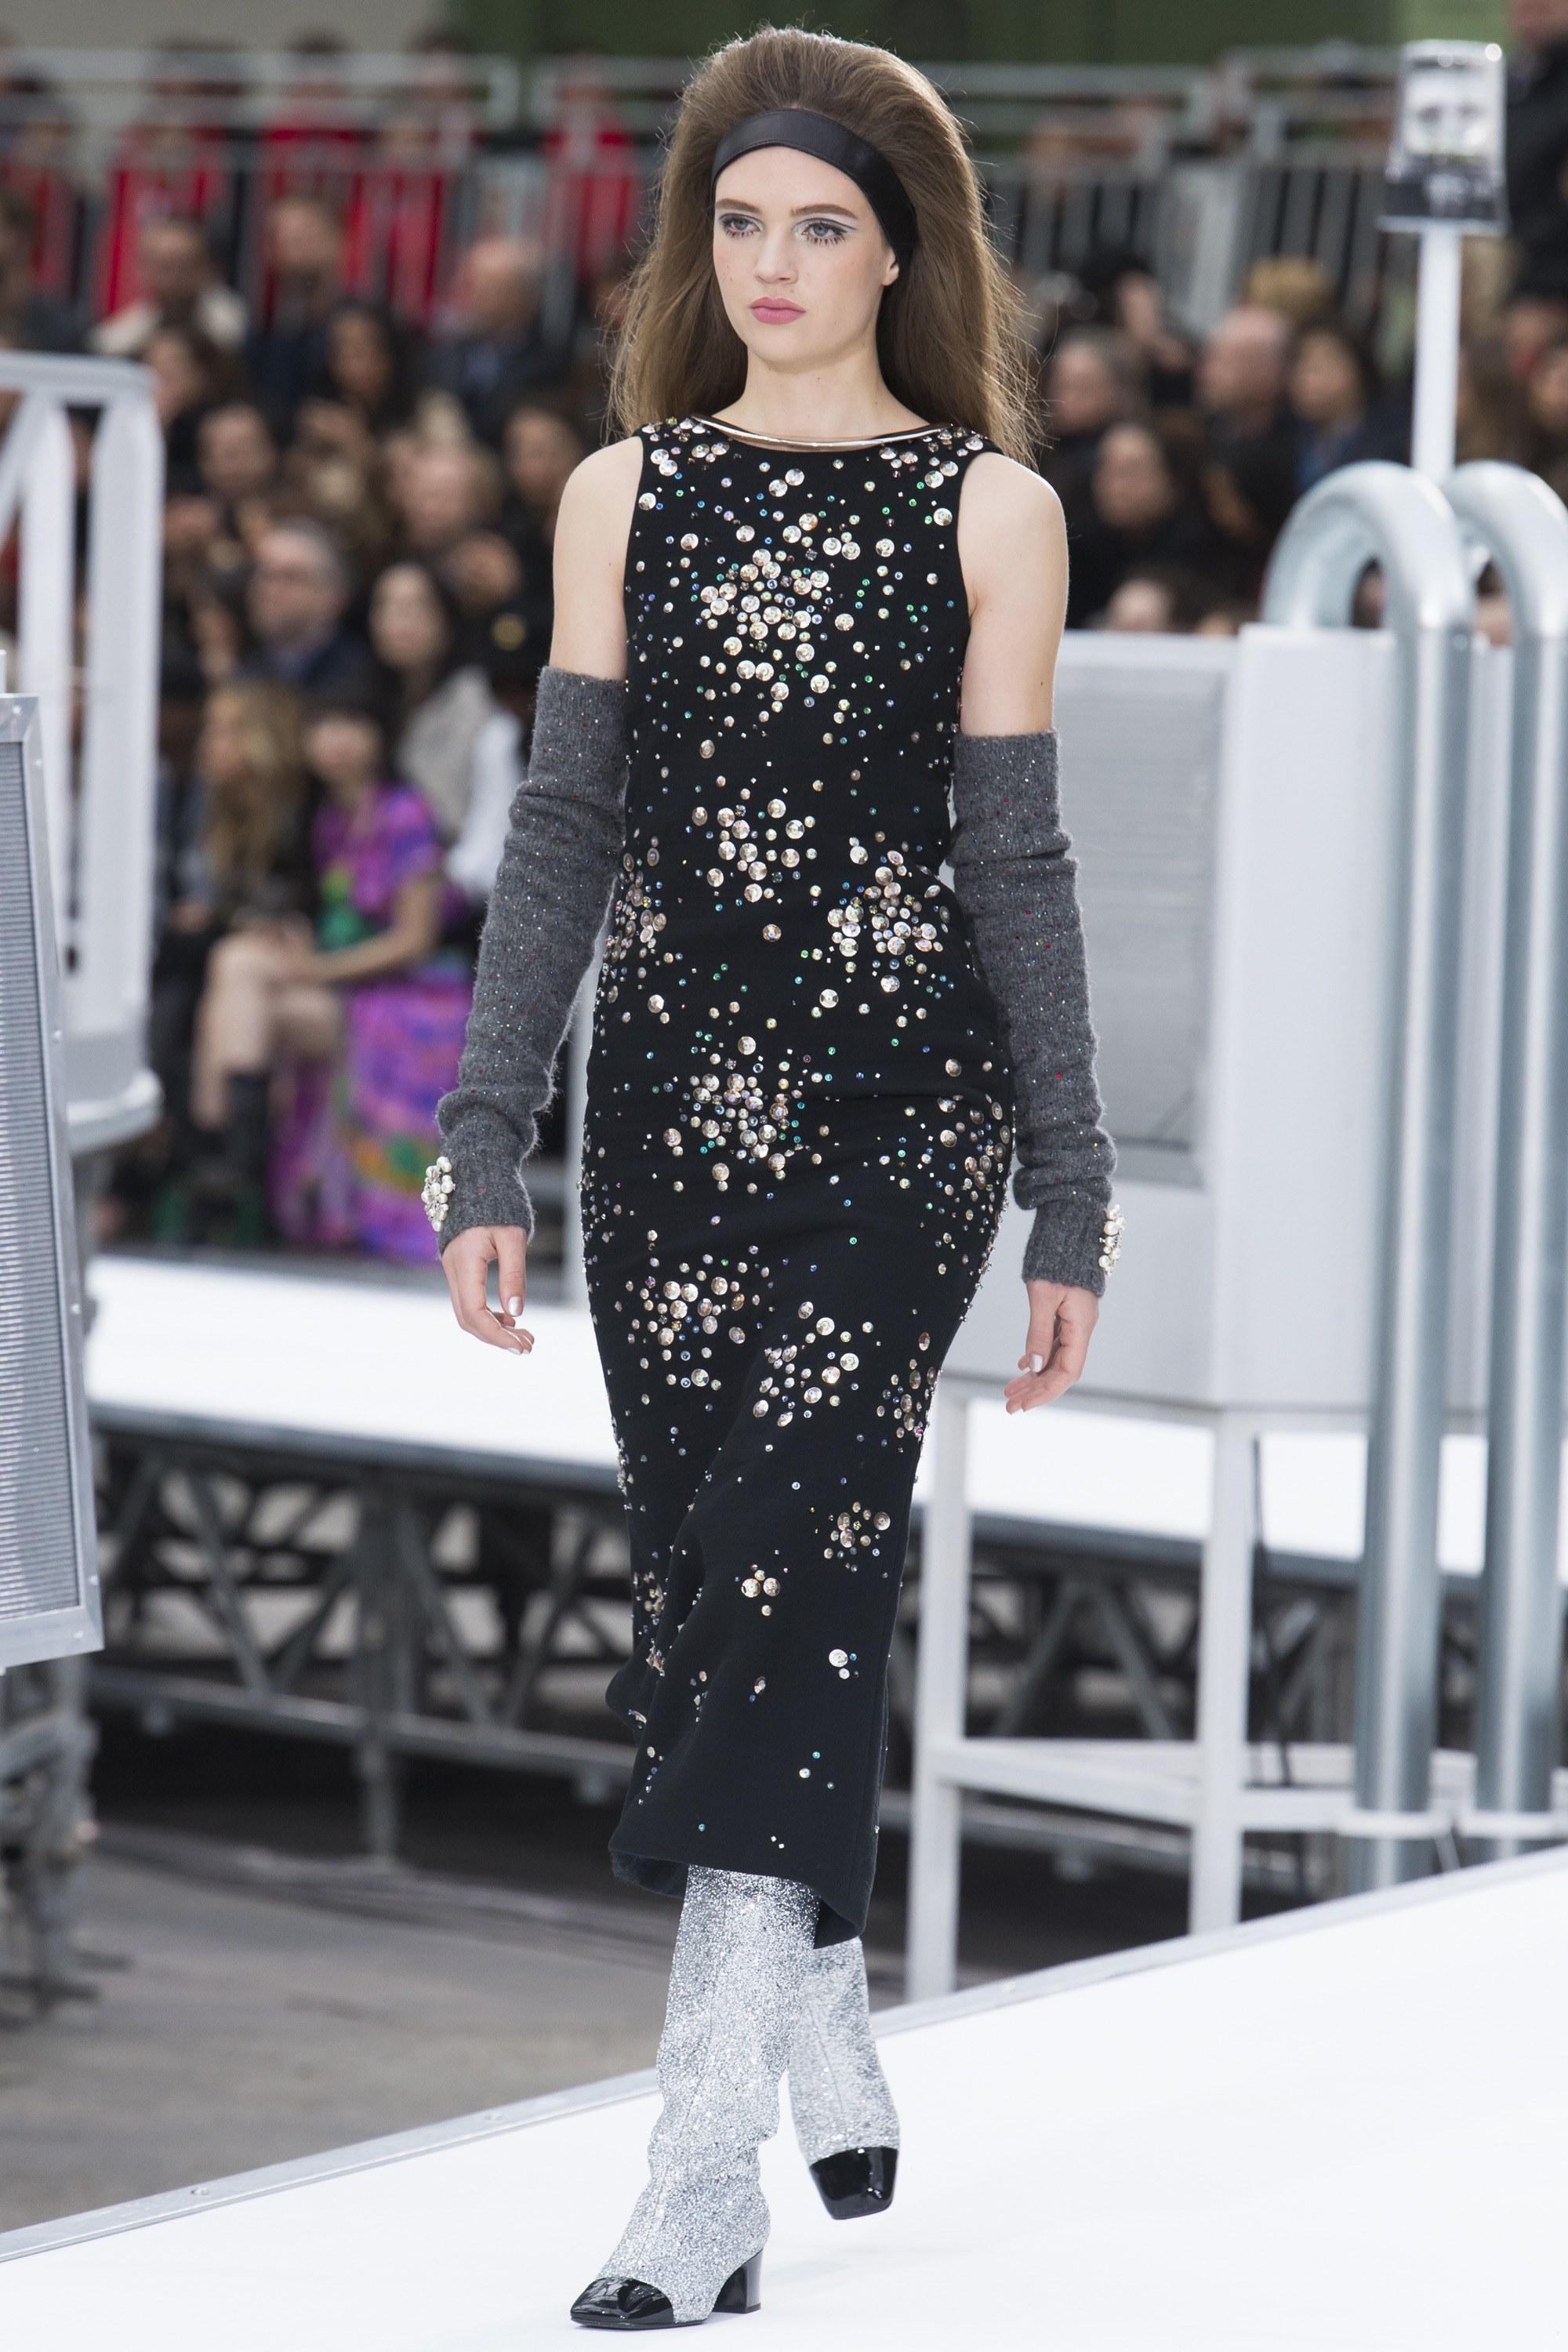 Chanel 17K Starburst Pearl CC Runway Brooch Pin.  Original retail price tag of $1685 included.  Shown worn one on each wrist pinned to knit gloves and sweaters on the Fall 2017 runway collection.  We have 2 of these in stock and are selling them